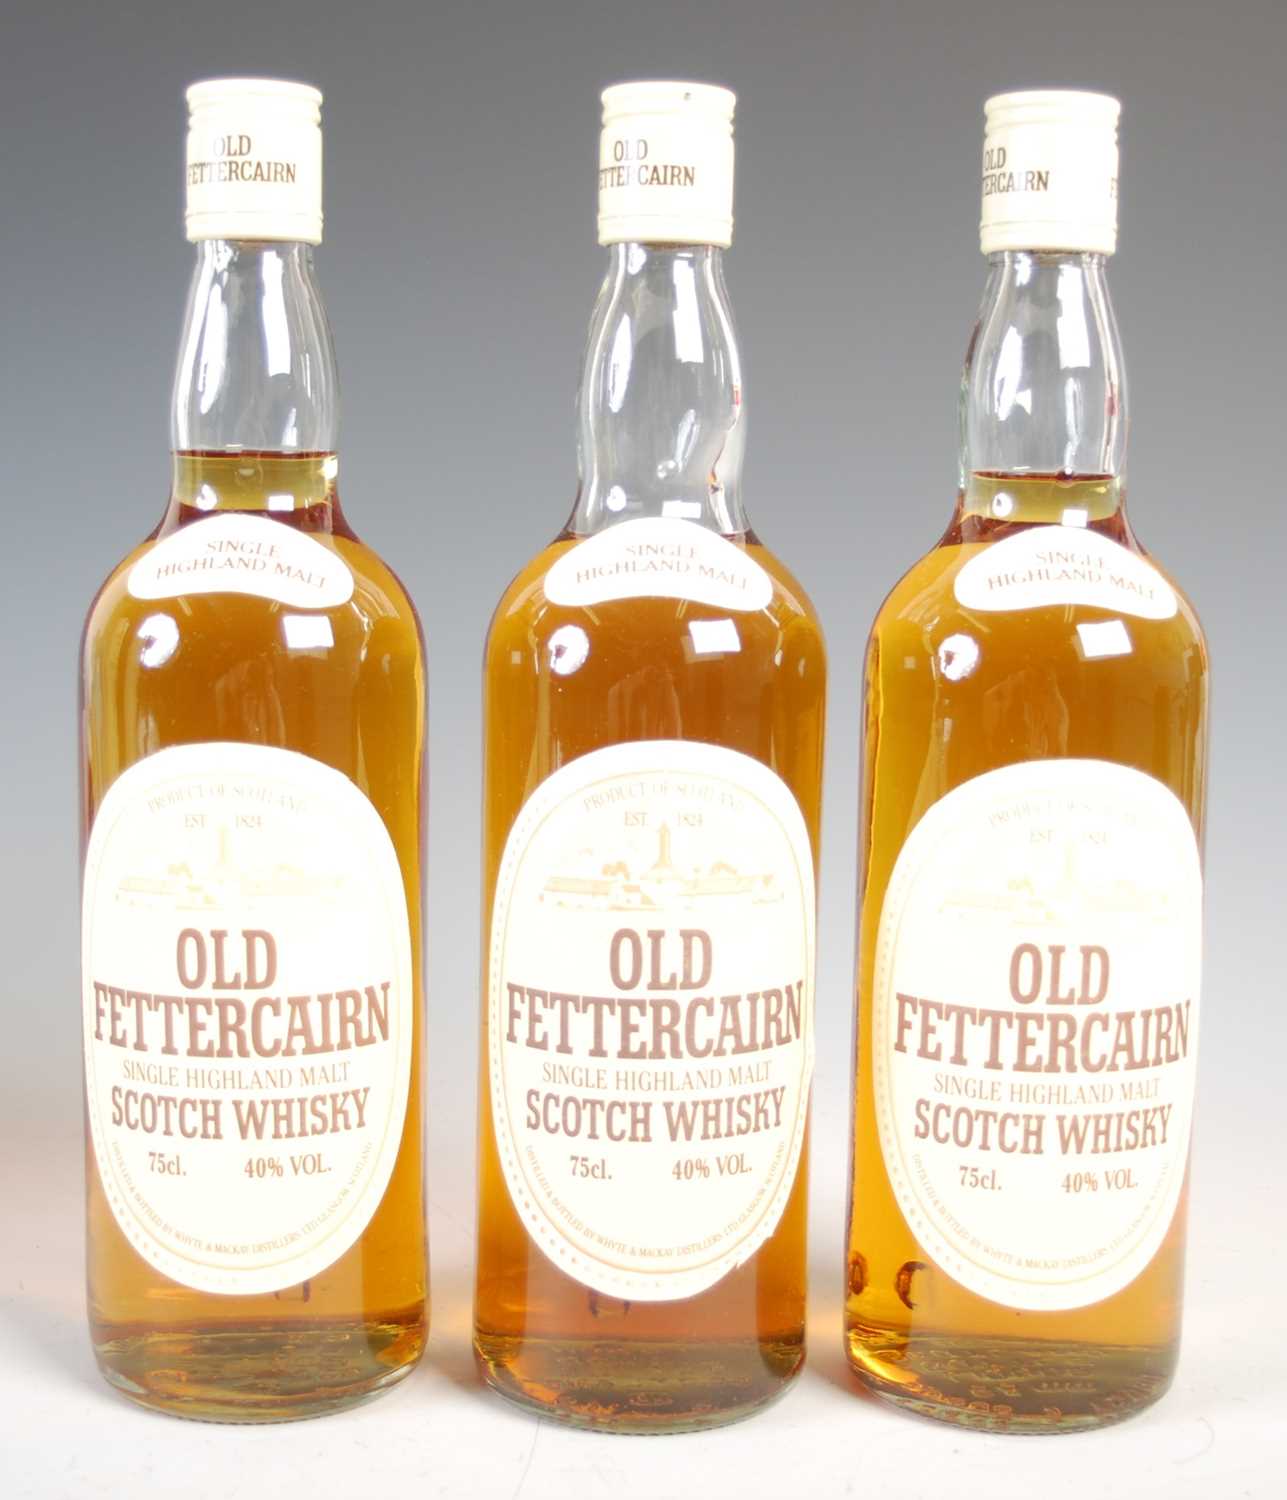 Three boxed bottles of Old Fettercairn single Highland malt Scotch whisky, 75cl, 40% Vol. (3). - Image 2 of 4